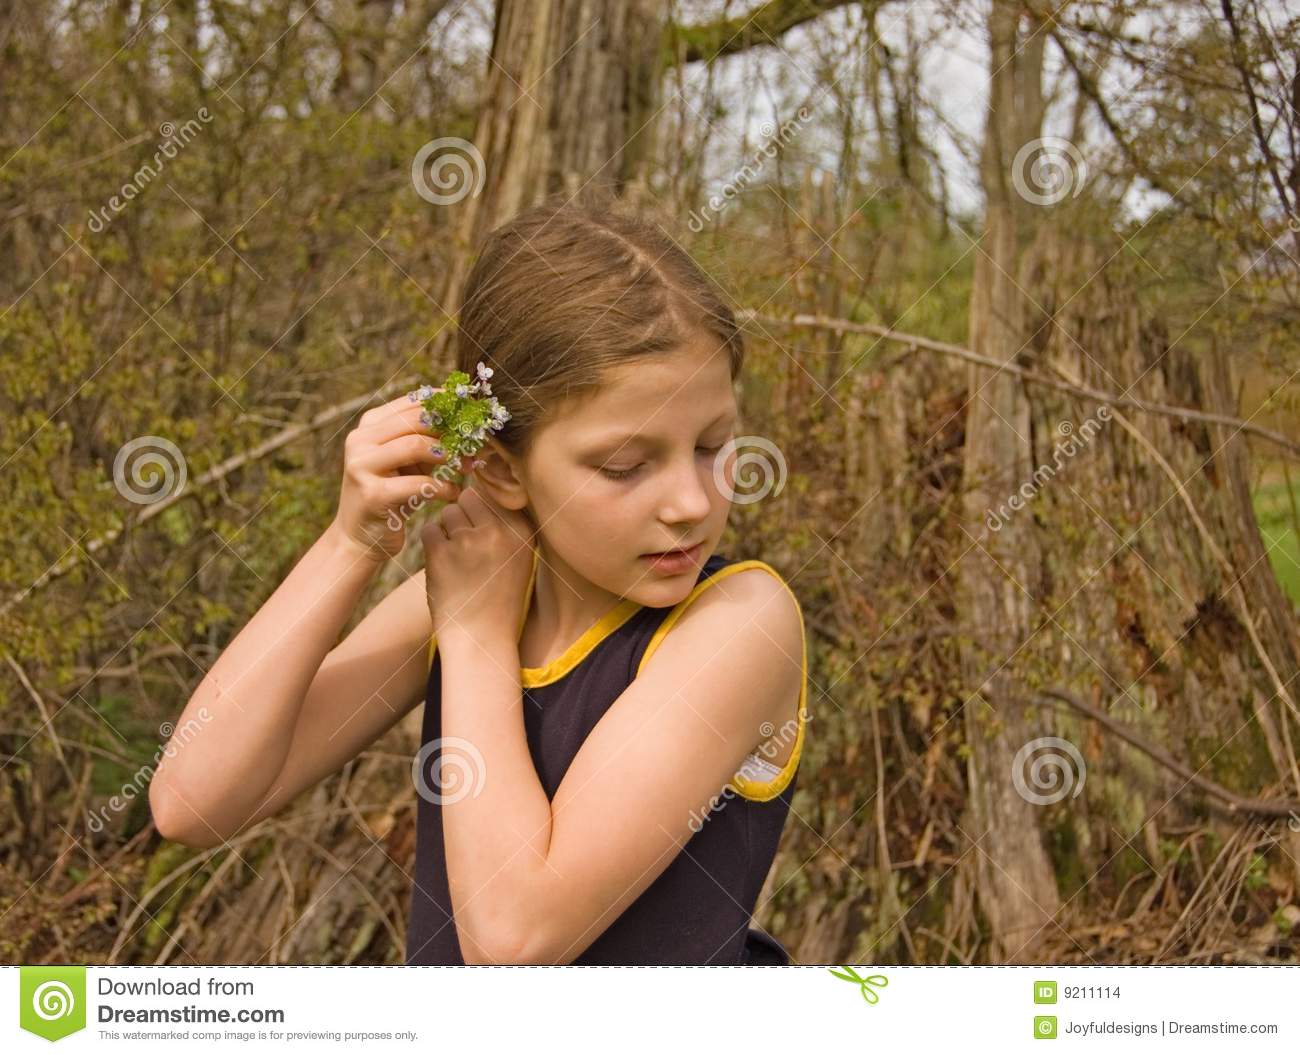 Cute 8 Year Old Girl Putting Flowers In Hair Stock Images   Image    